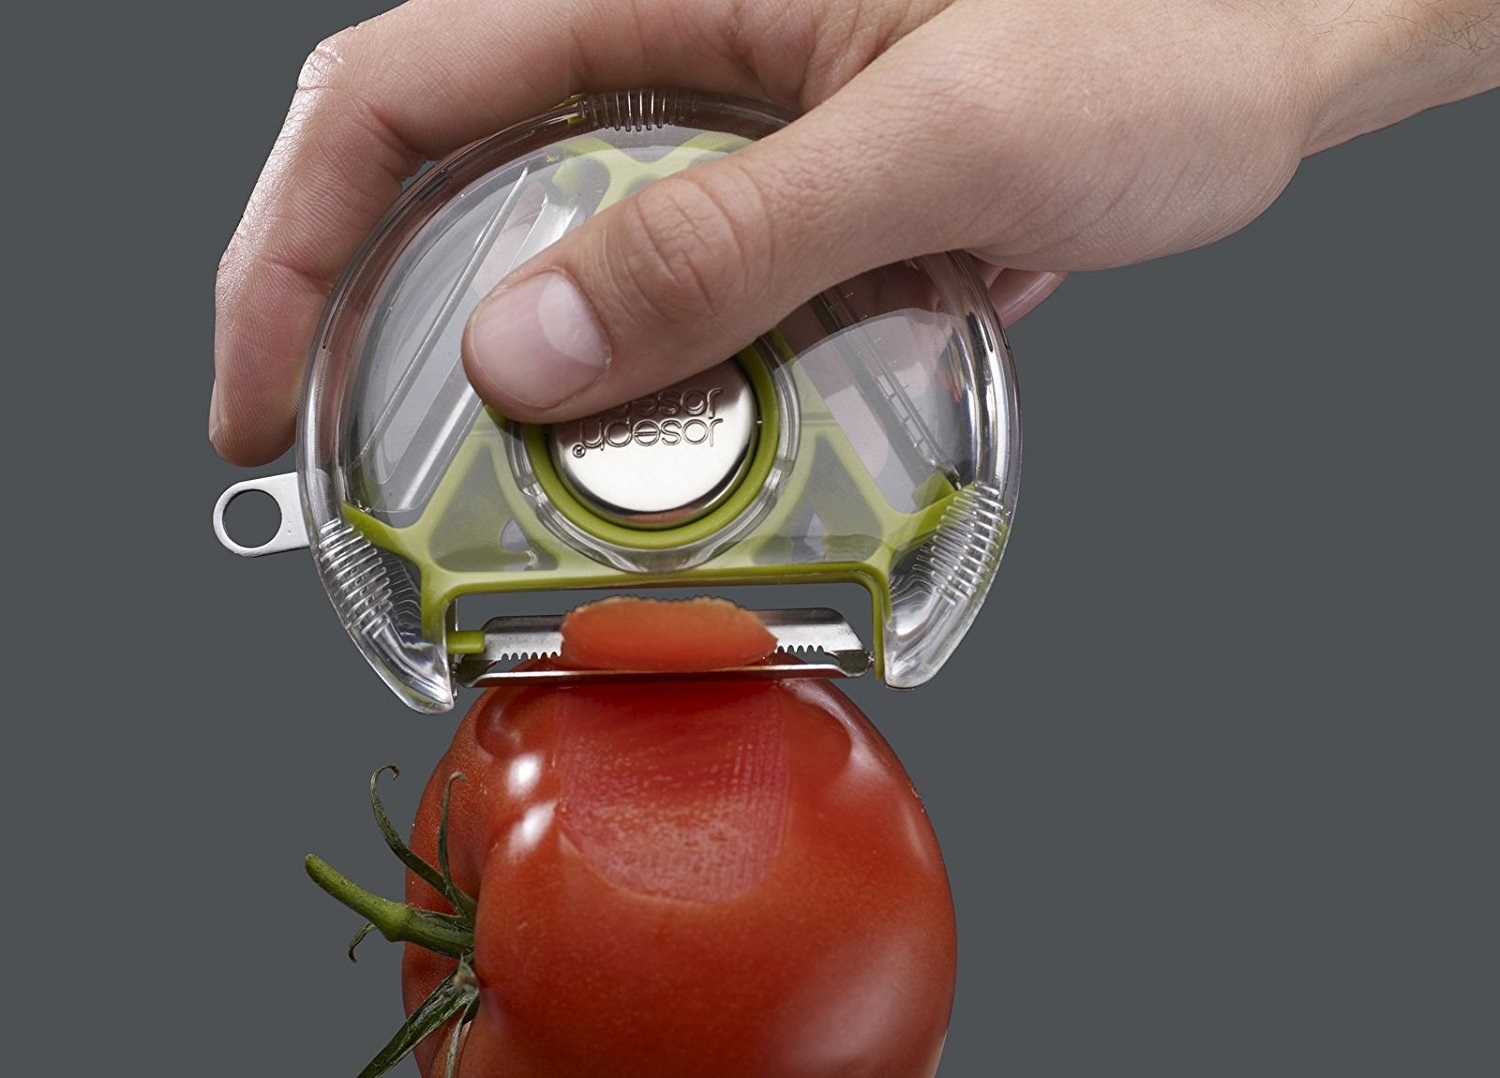 A flat cylindrical vegetable peeler with an open end to expose the desirable blade